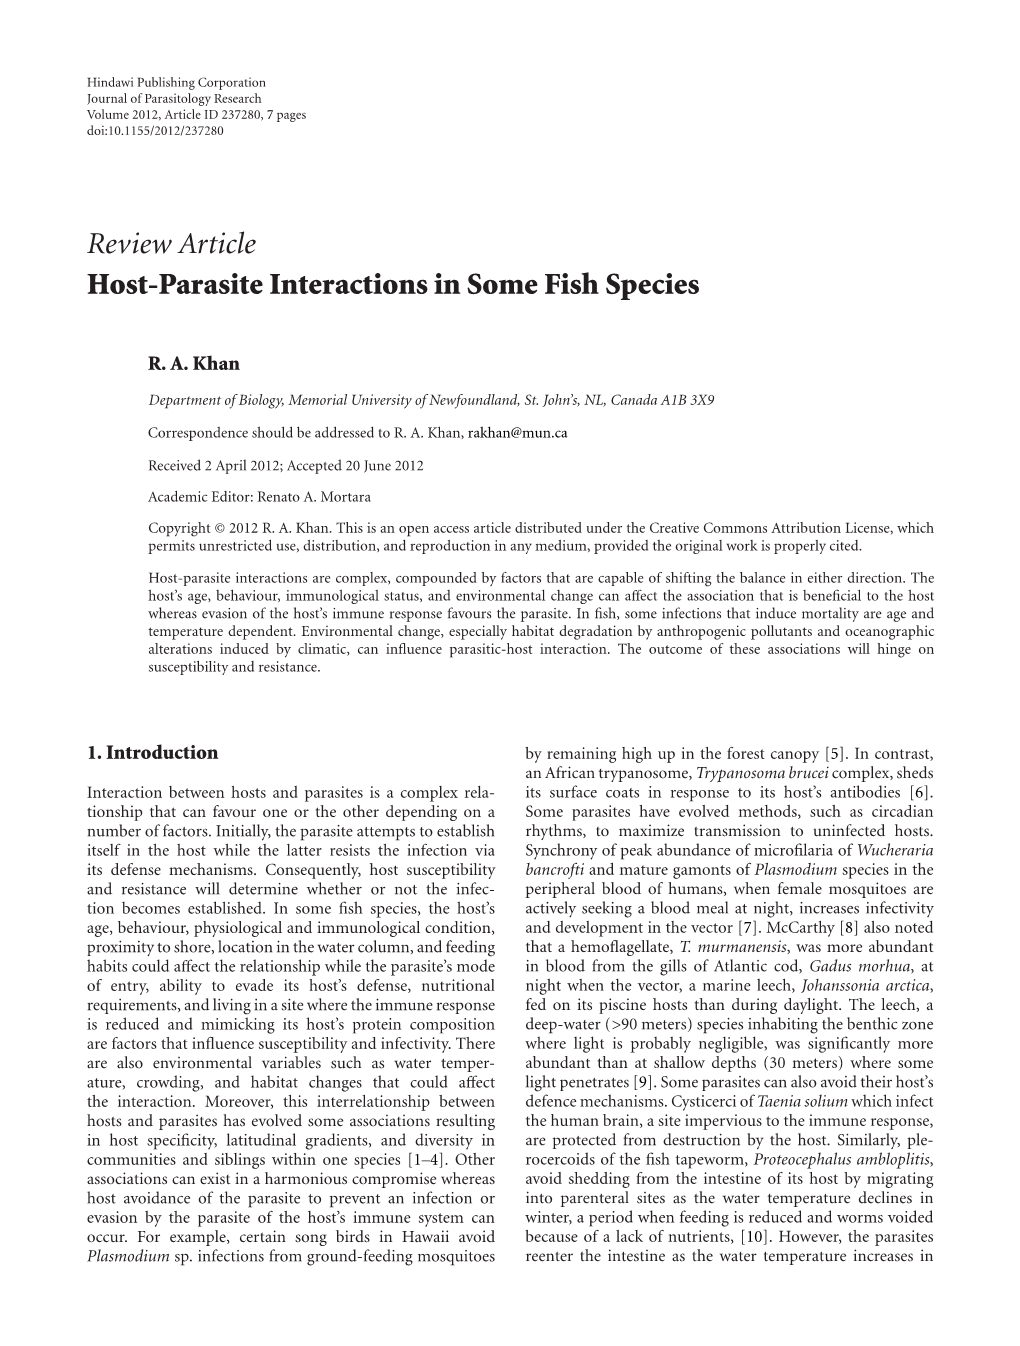 Host-Parasite Interactions in Some Fish Species